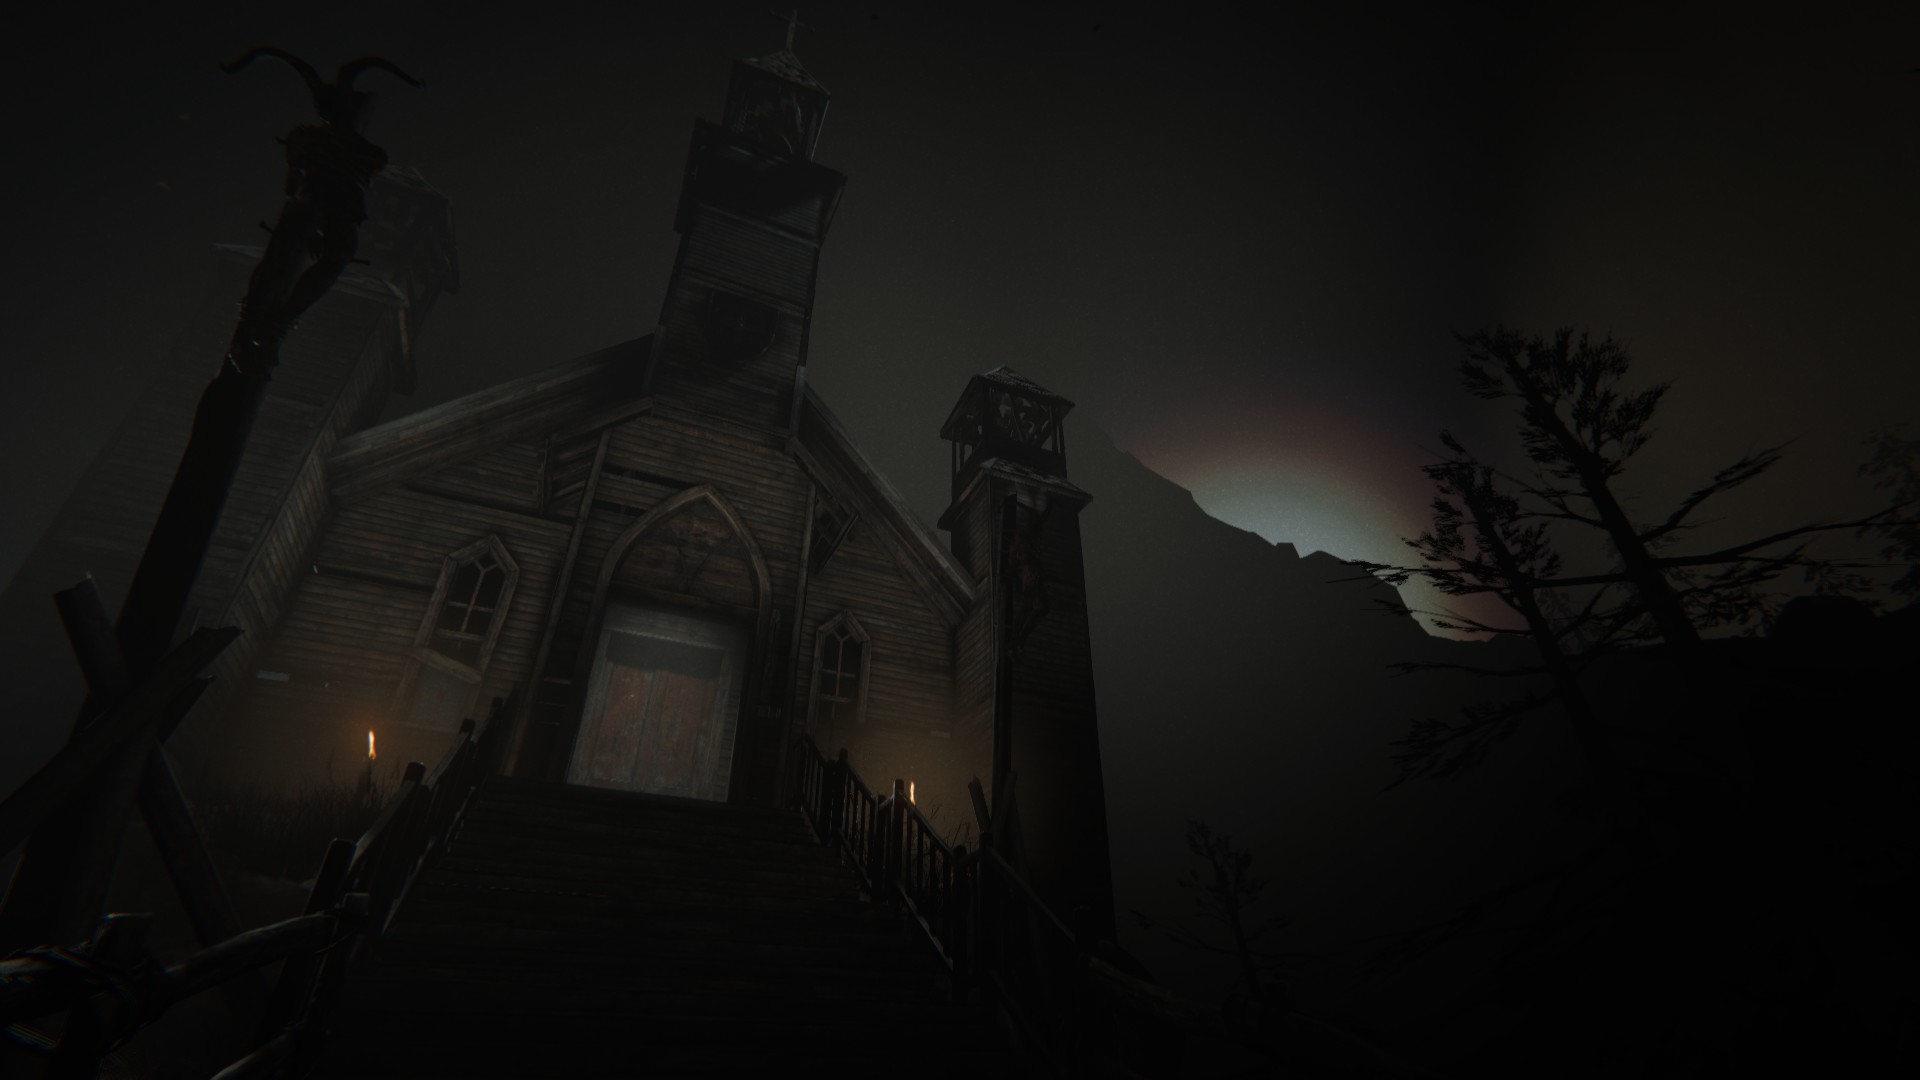 outlast steam download free